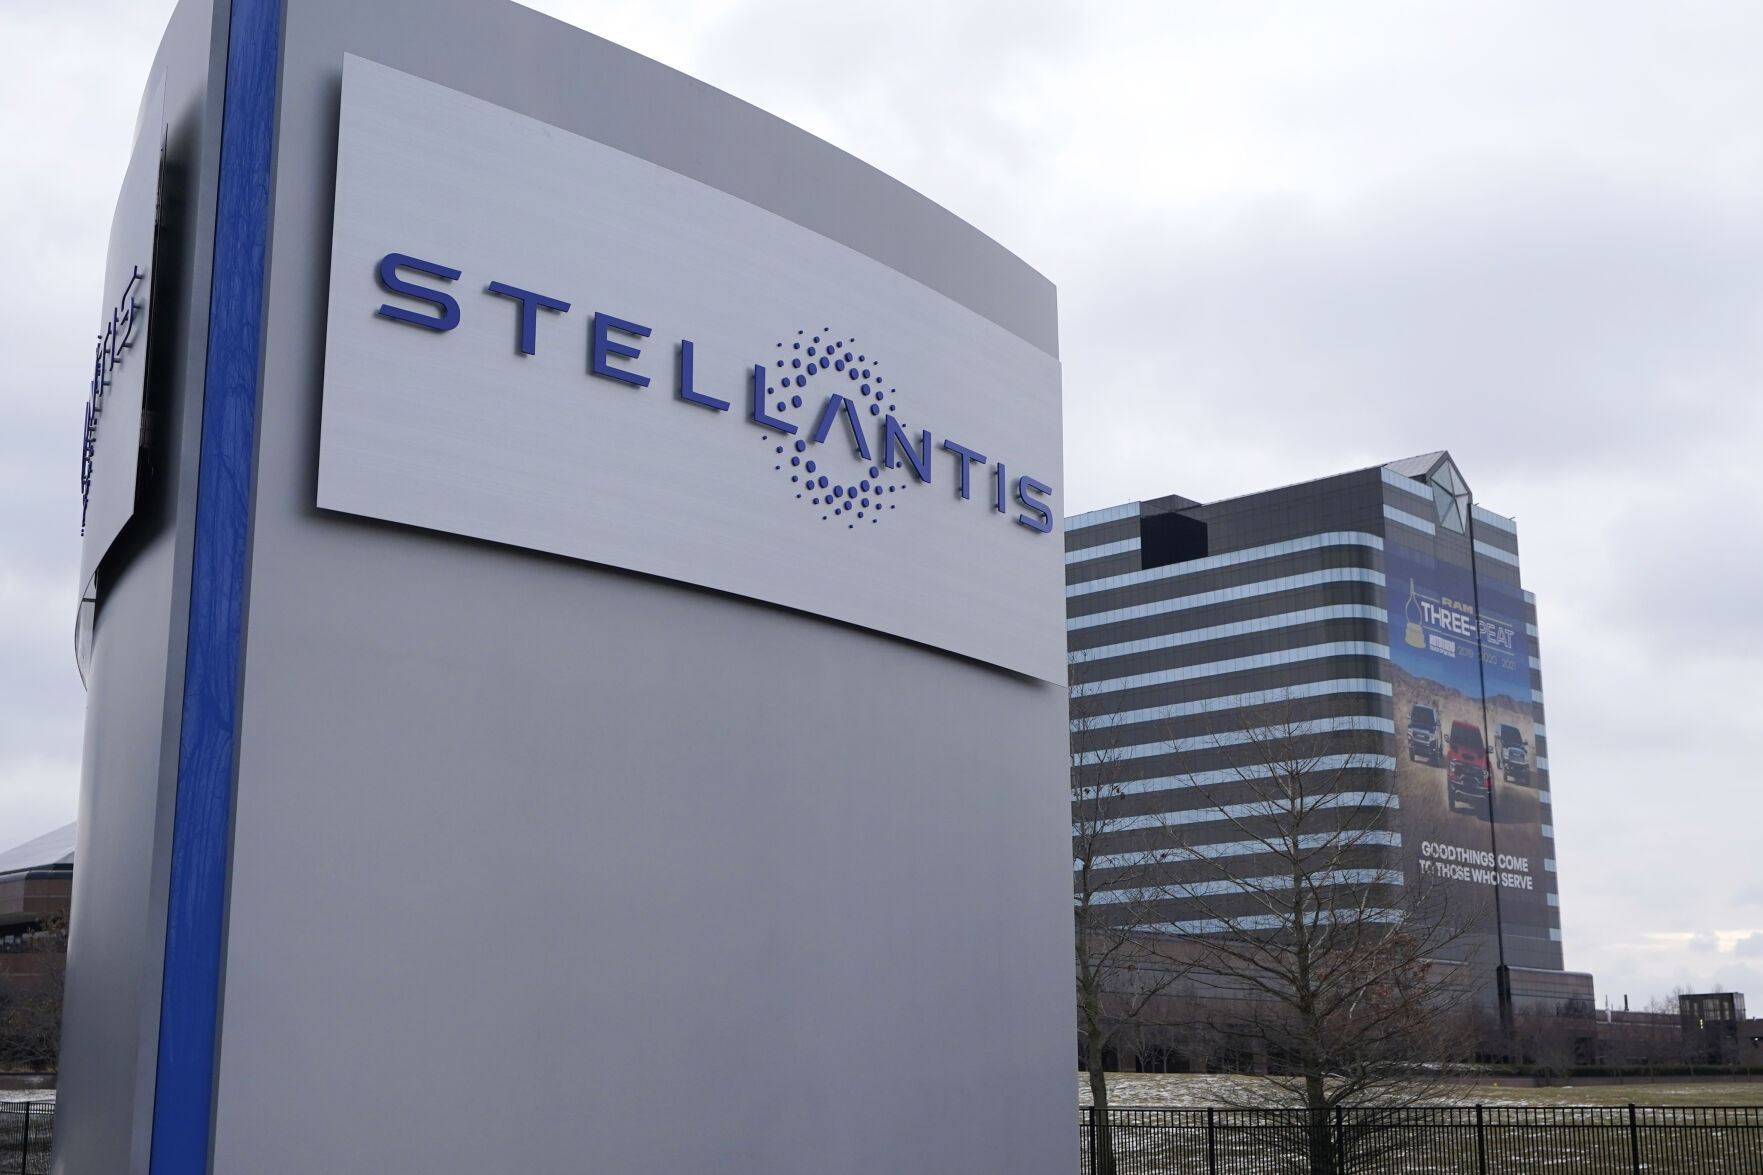 <p>FILE - This Jan. 19, 2021 file photo shows the Stellantis sign outside the Chrysler Technology Center in Auburn Hills, Mich. Stellantis said Wednesday, Oct. 11, 2023, it will build a second electric vehicle battery factory in Kokomo, Indiana, that will create 1,400 new jobs. The $3.2 billion joint venture factory with South Korea’s Samsung SDI is to start production early in 2027. (AP Photo/Carlos Osorio, File)</p>   PHOTO CREDIT: Carlos Osorio 